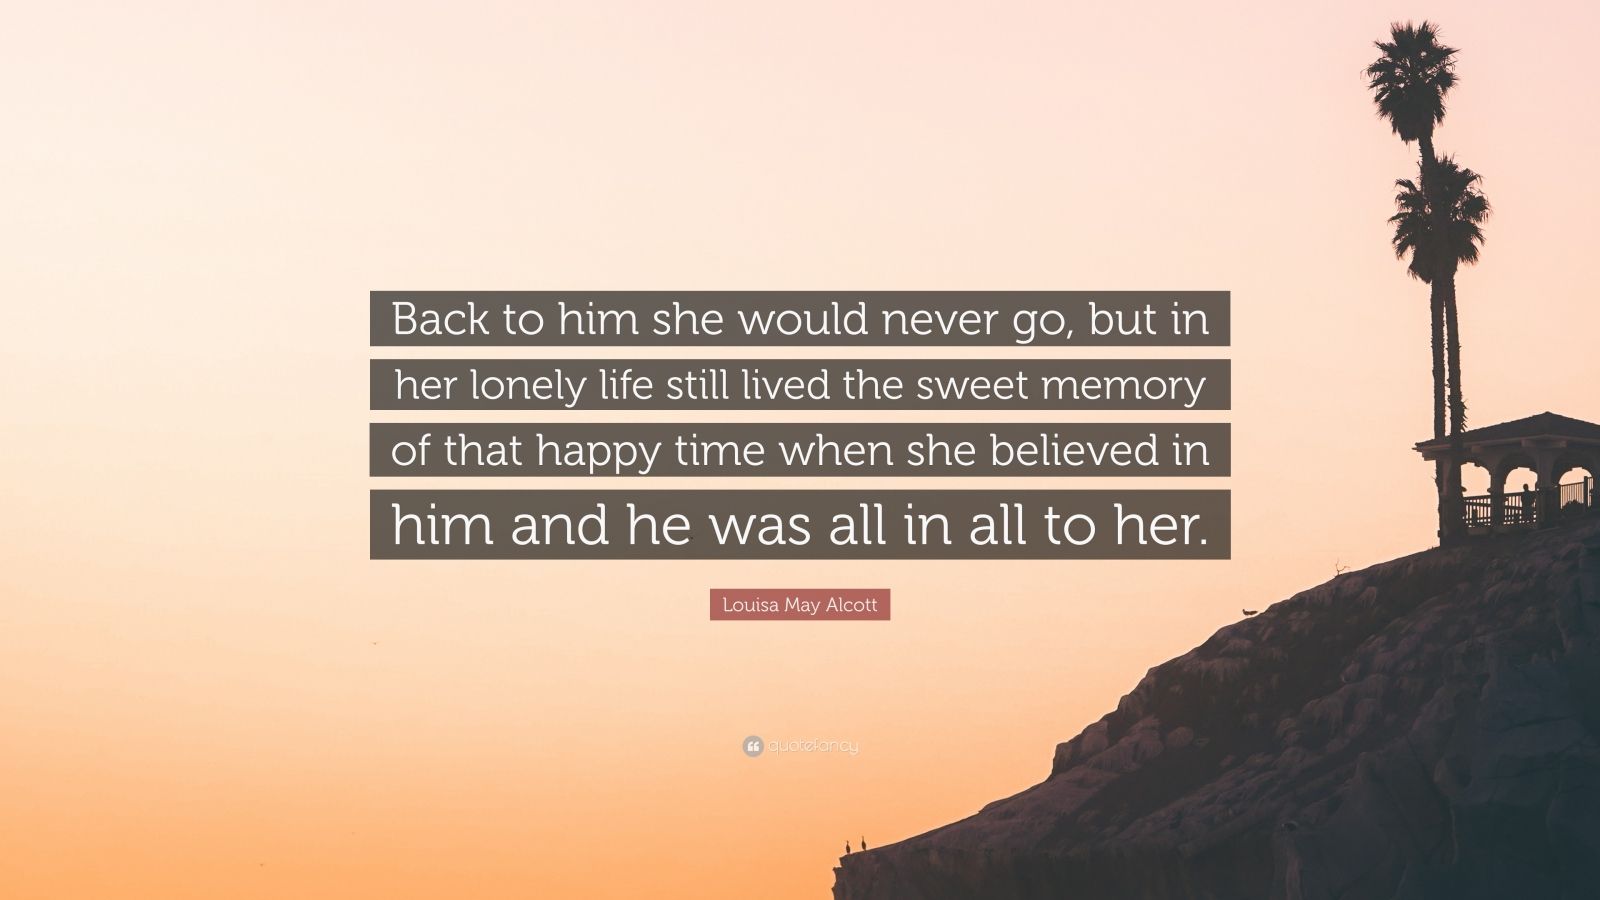 Louisa May Alcott Quote: “Back to him she would never go, but in her lonely life still lived the ...